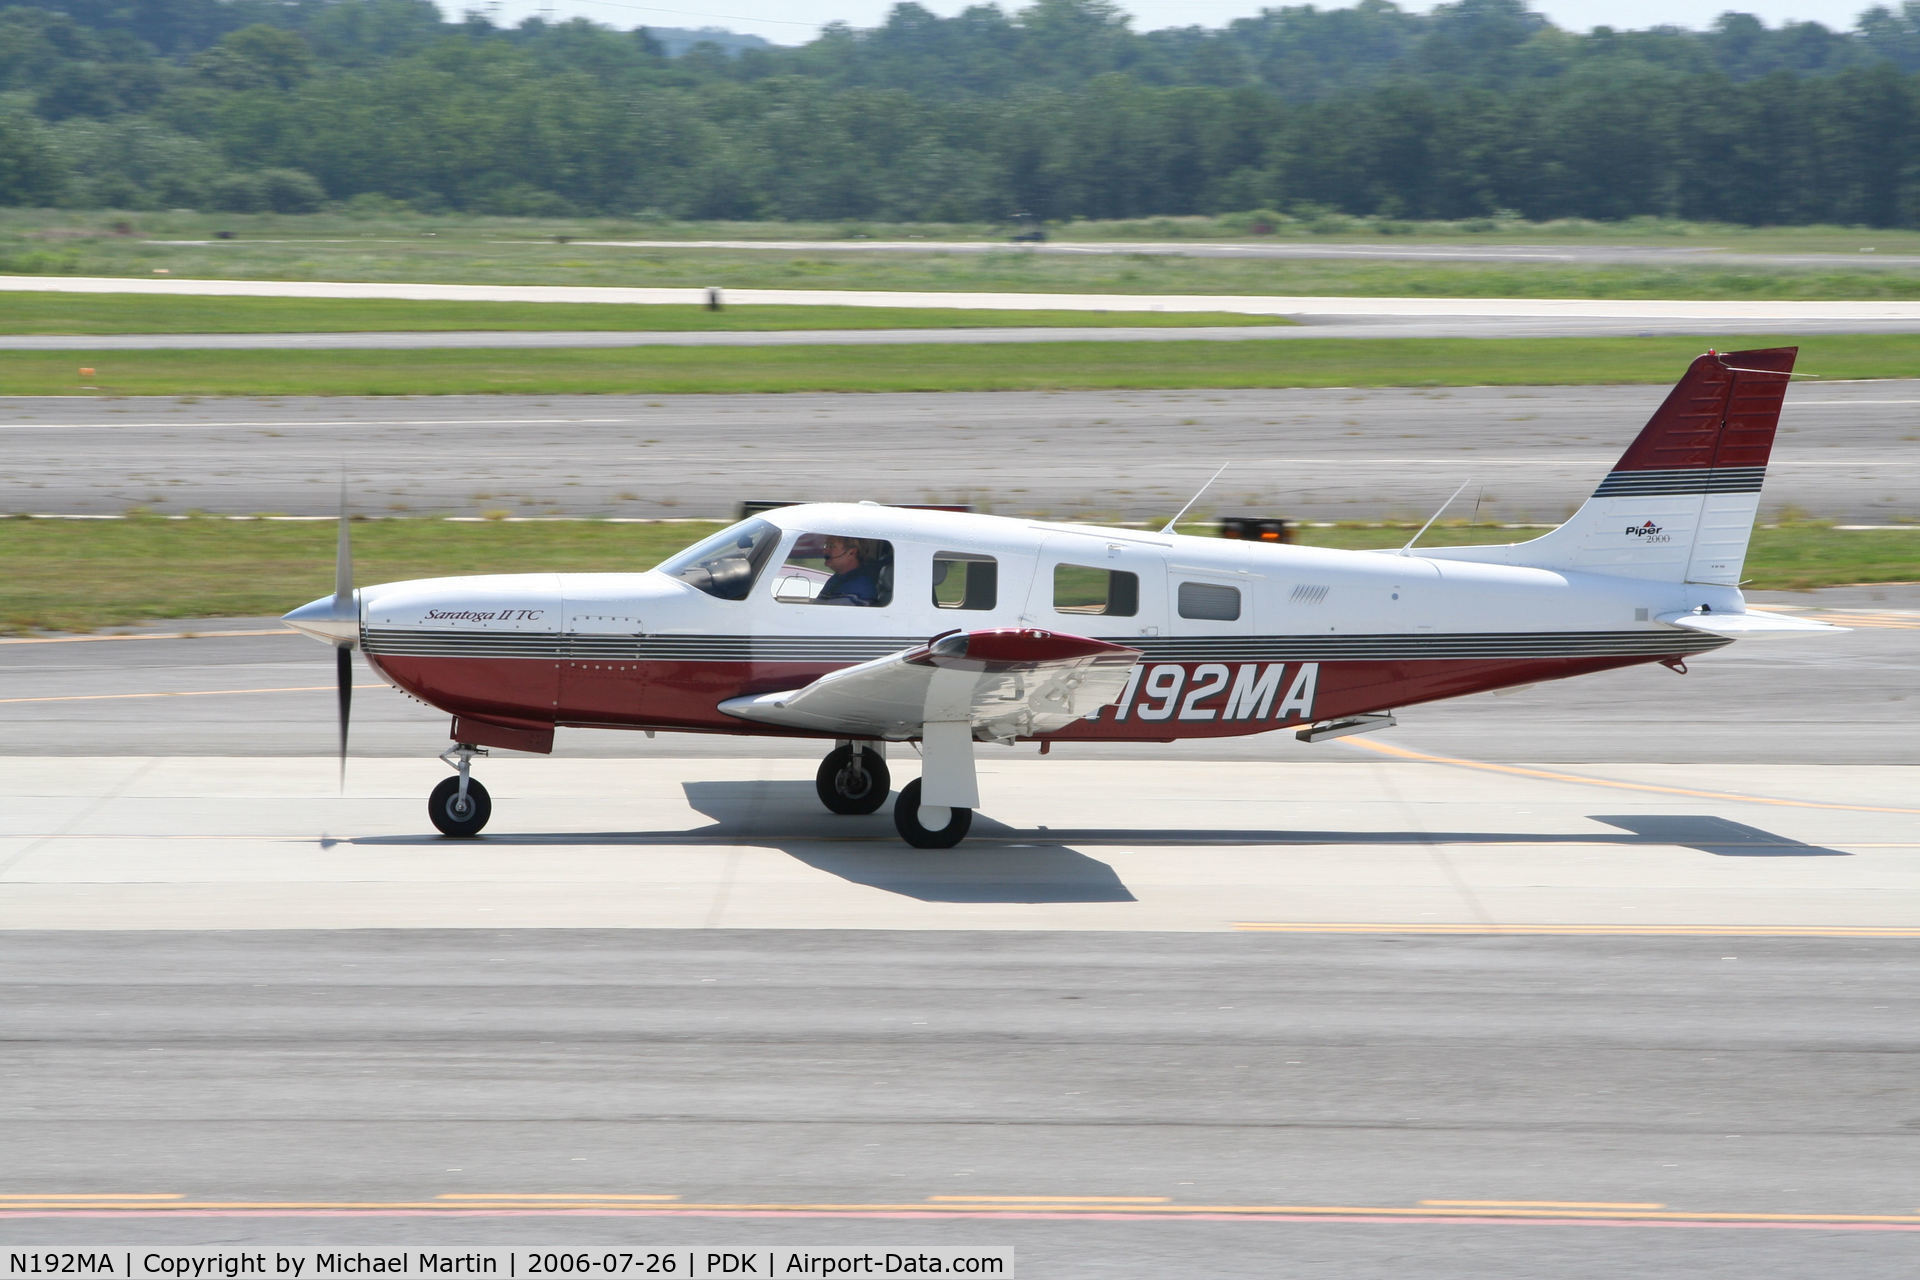 N192MA, 2000 Piper PA-32R-301T Turbo Saratoga C/N 3257192, Taxing to Epps Air Service